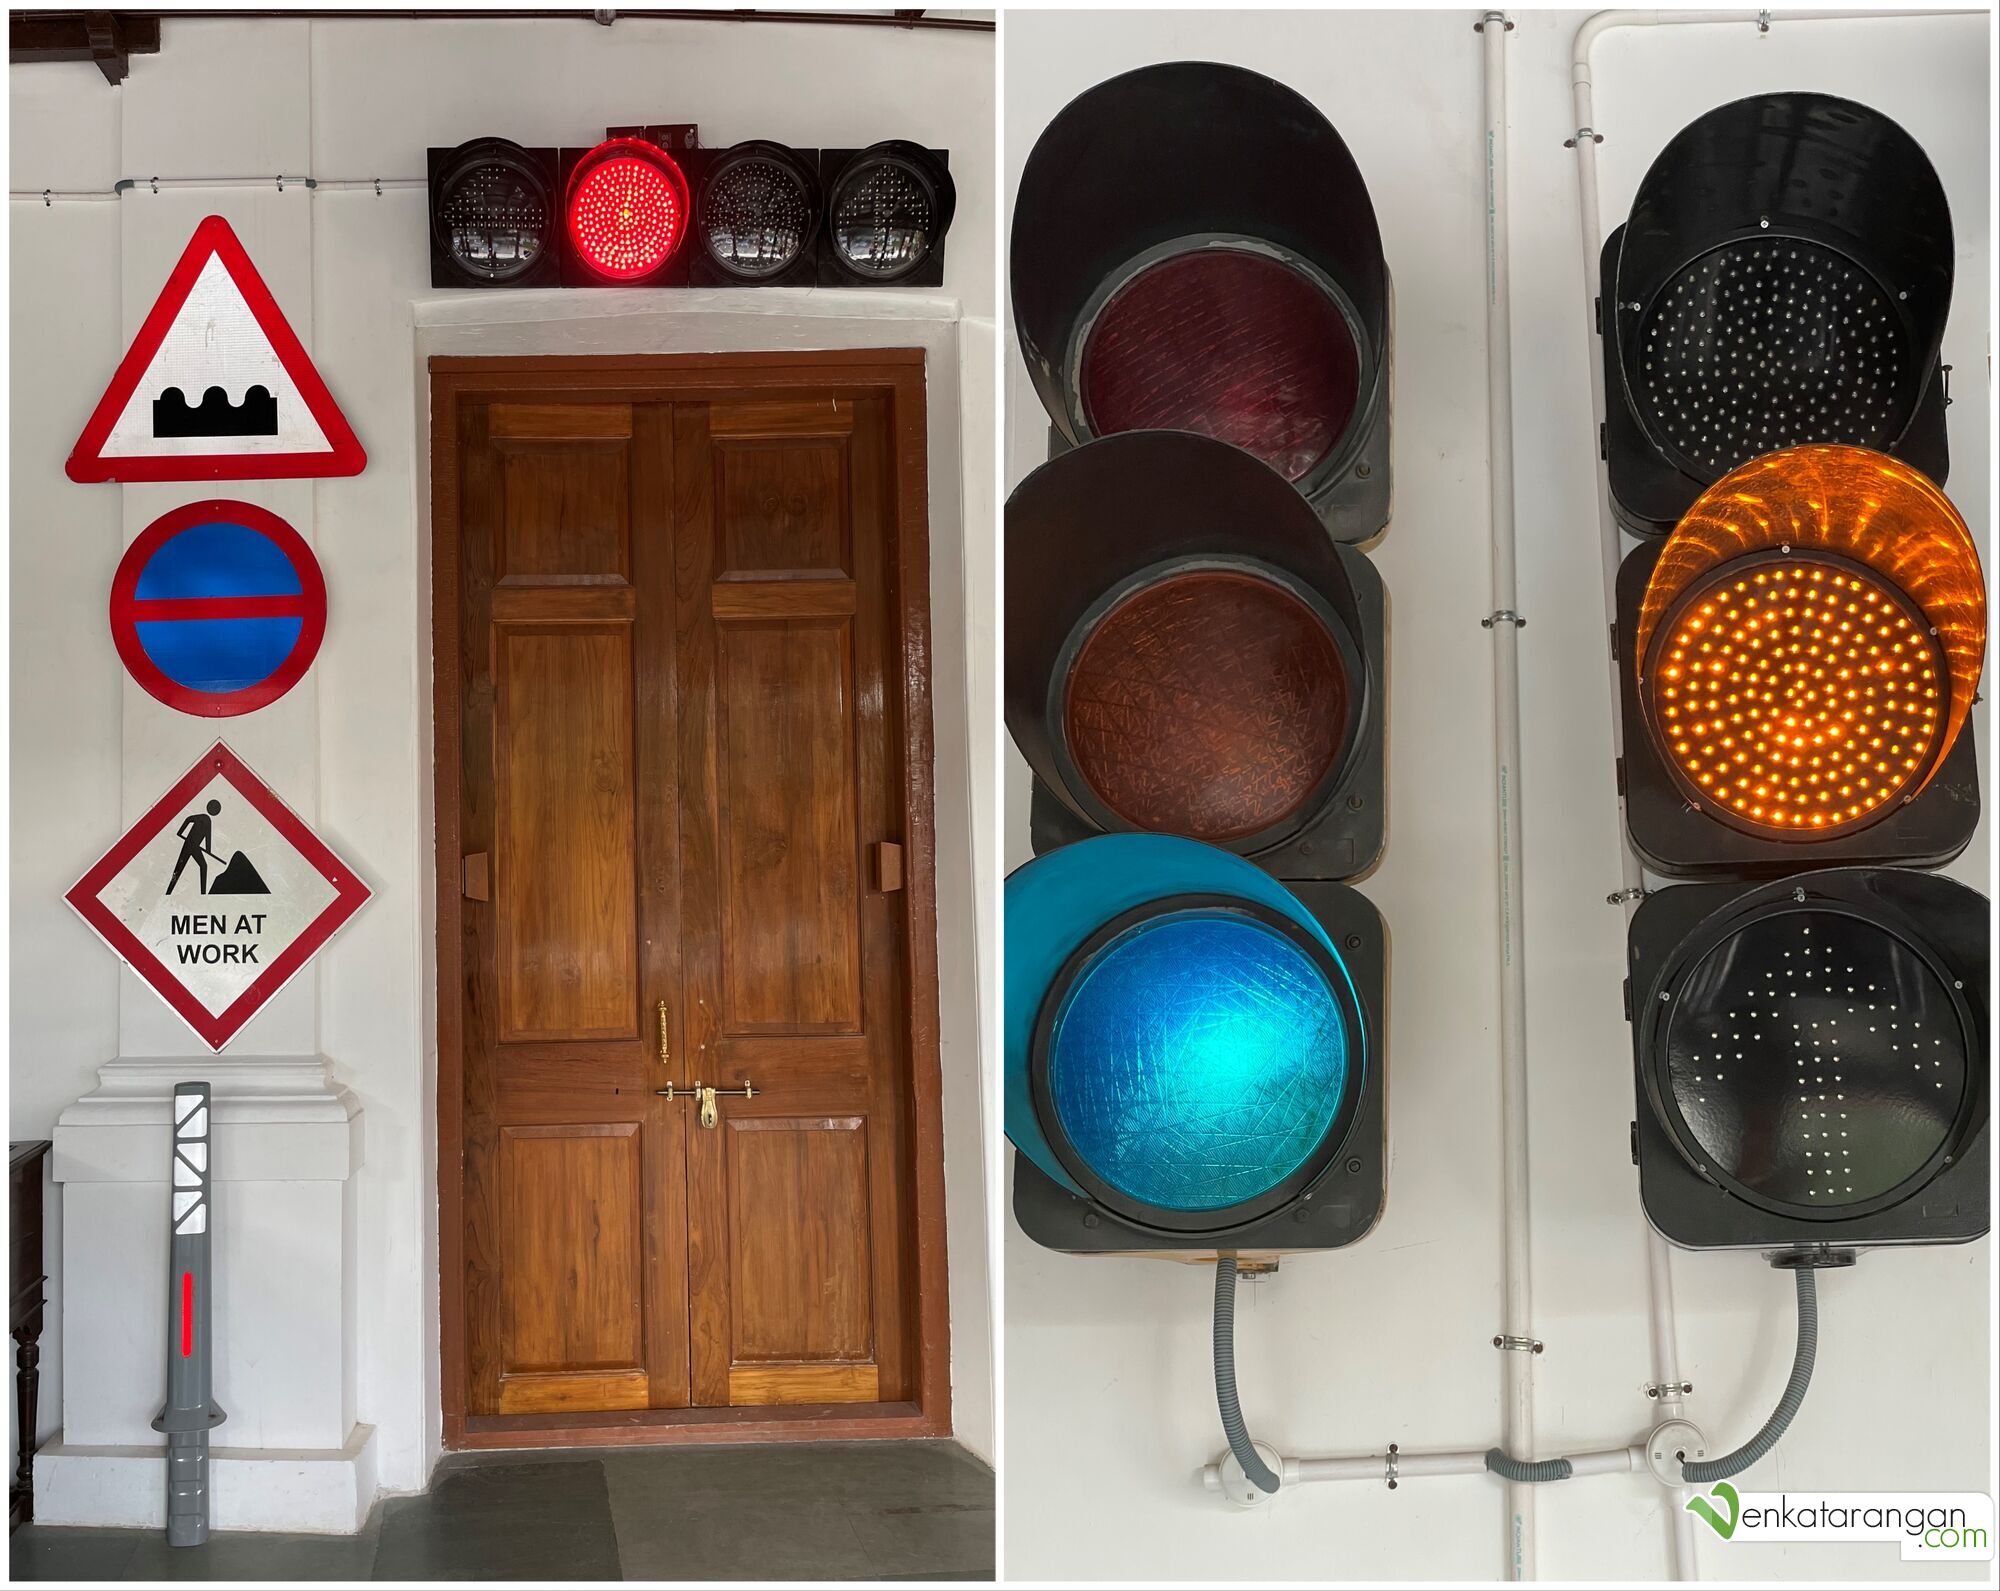 Road safety signs and traffic signal